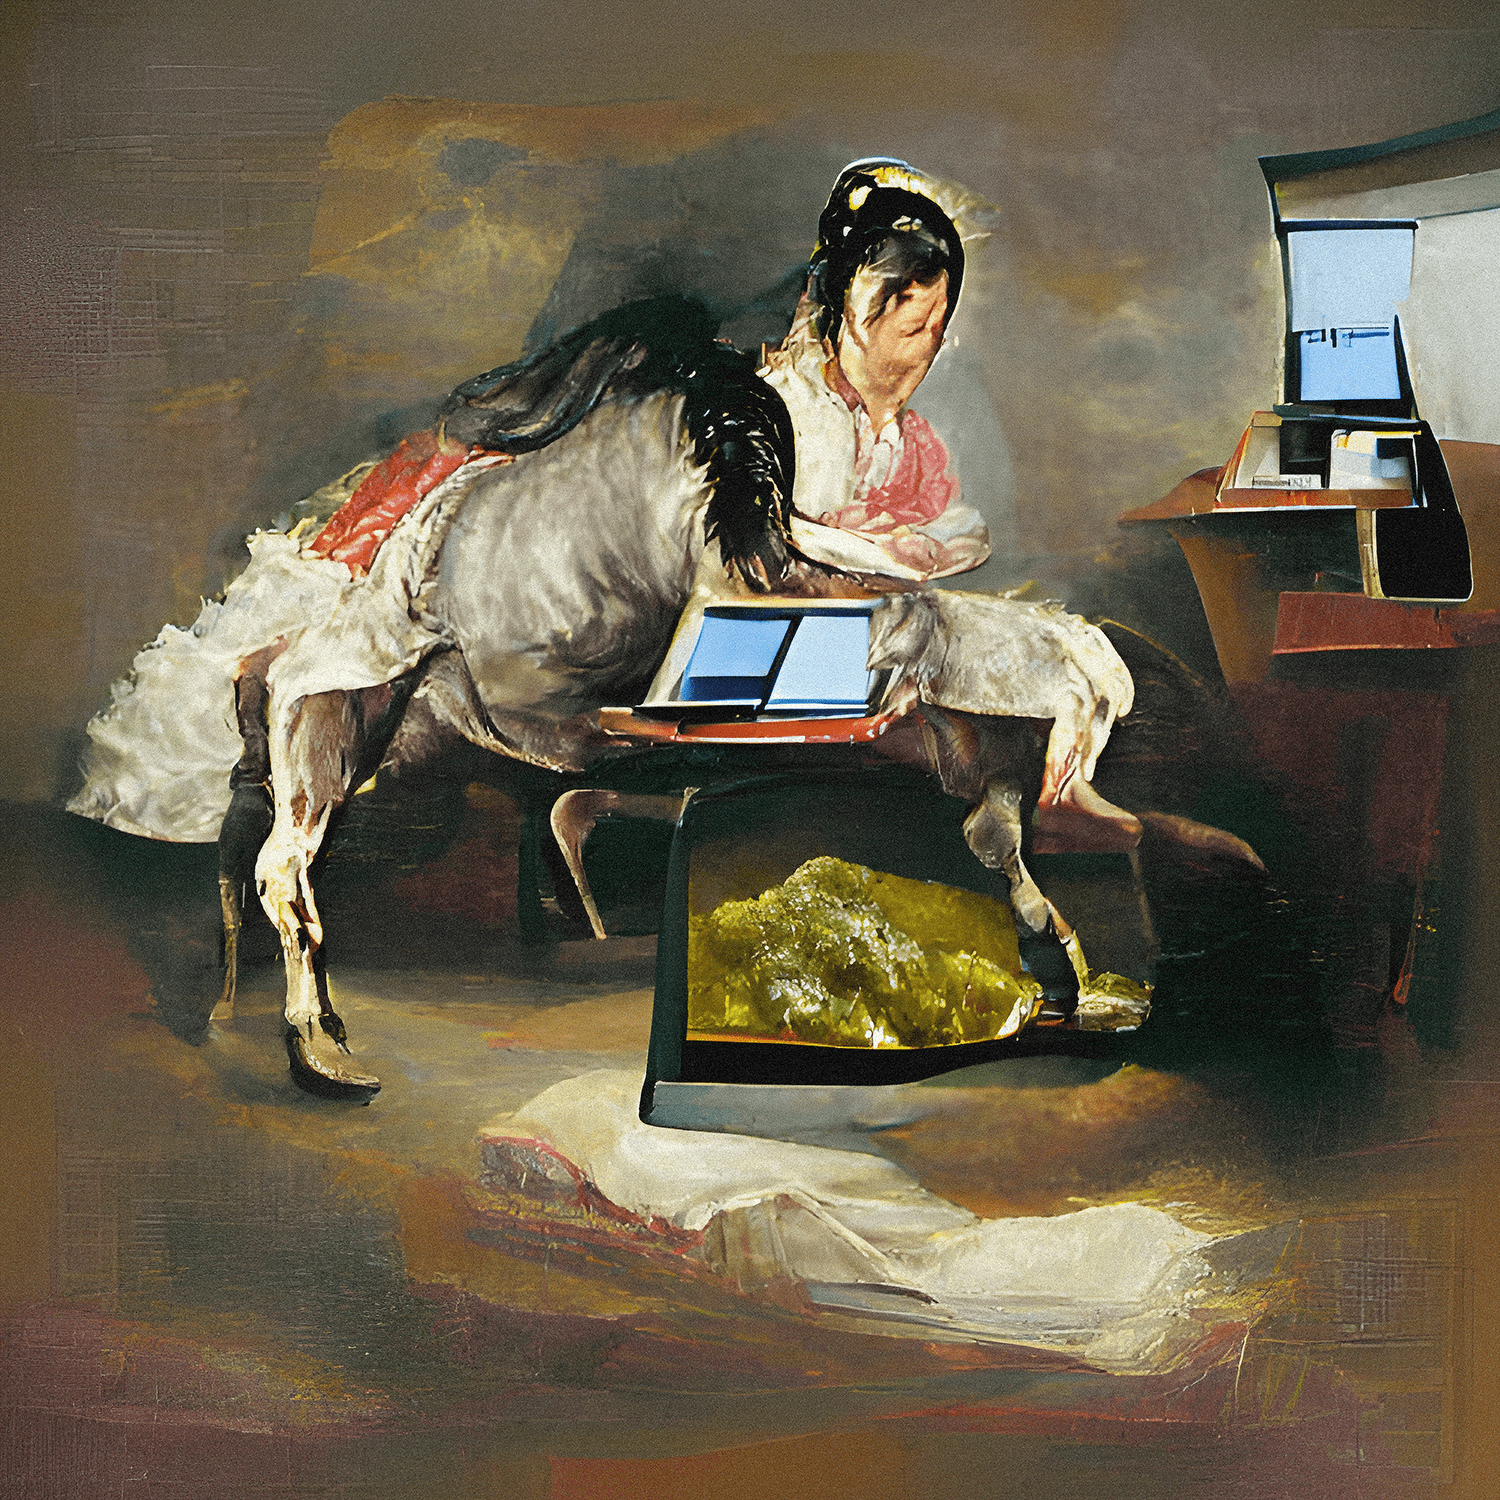 Well dressed centaur searching on the internet